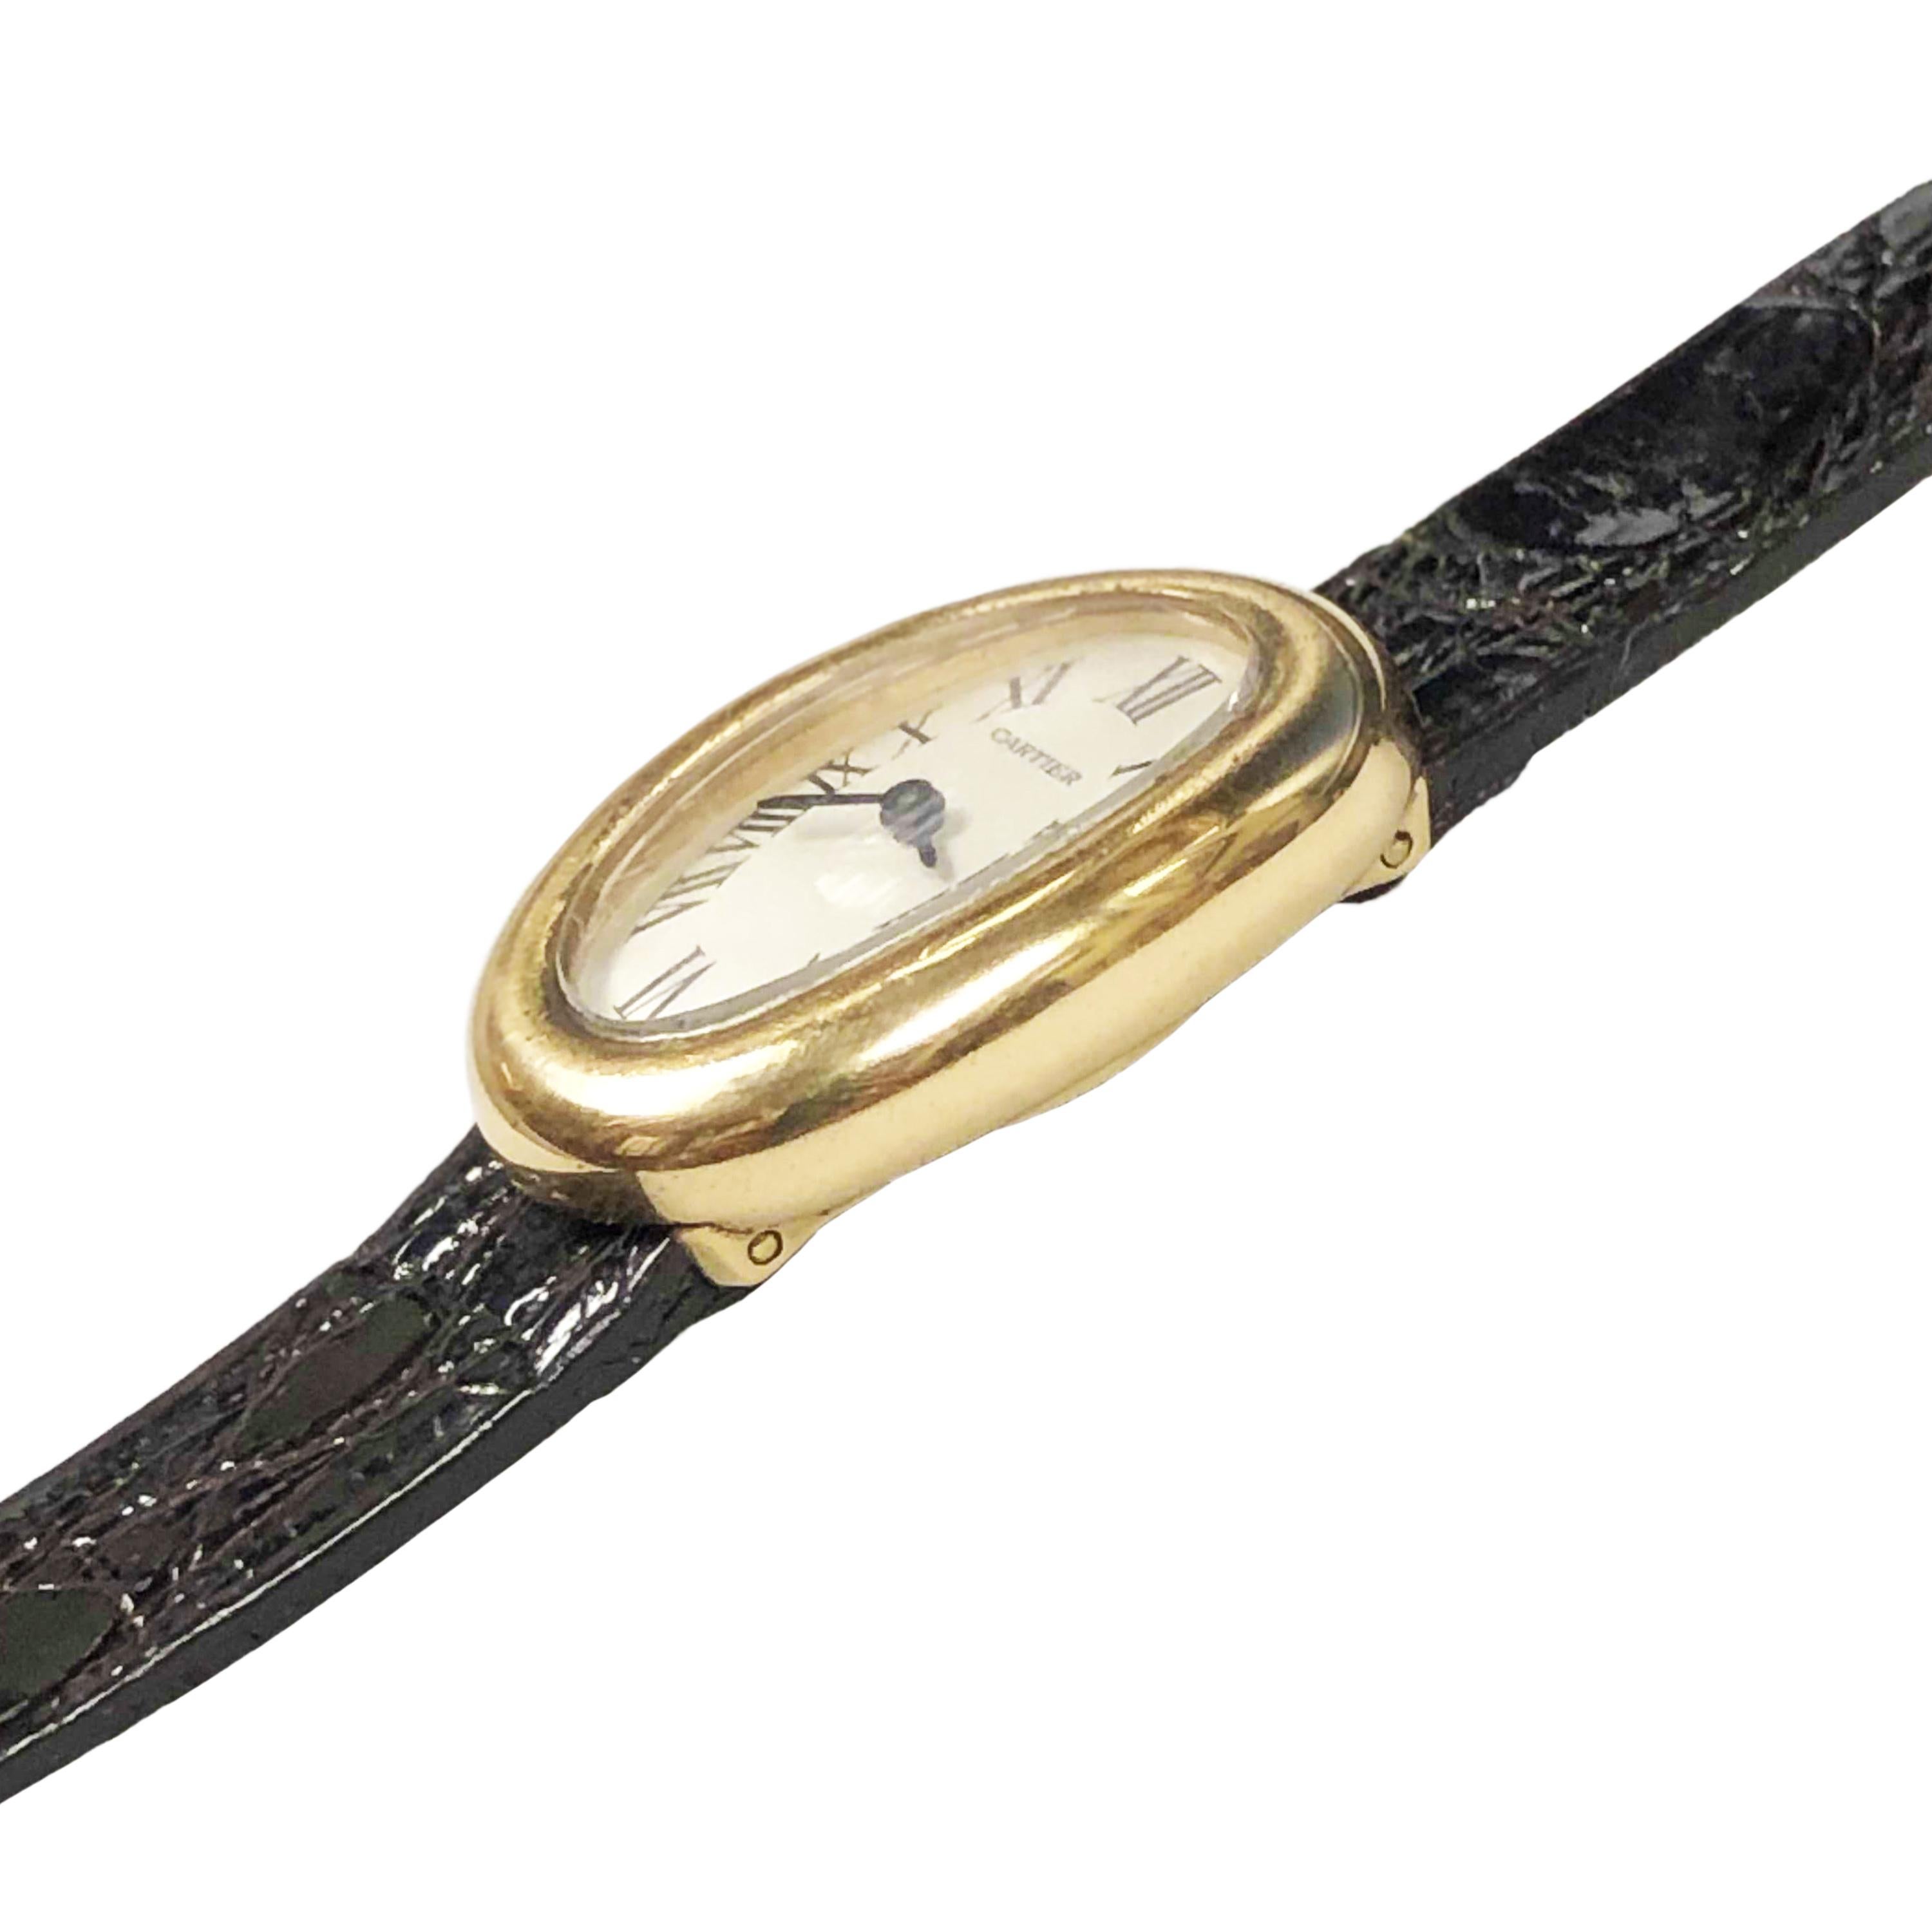 Circa 1980 Cartier Baignoire Wrist watch owned and worn by Hollywood Icon Jerry Lewis. 25 X 18 MM 18K yellow Gold 2 piece Case. Back set Quartz Movement. White dial with Black Roman Numerals. New brown Alligator Strap with Cartier 18k Tang buckle,